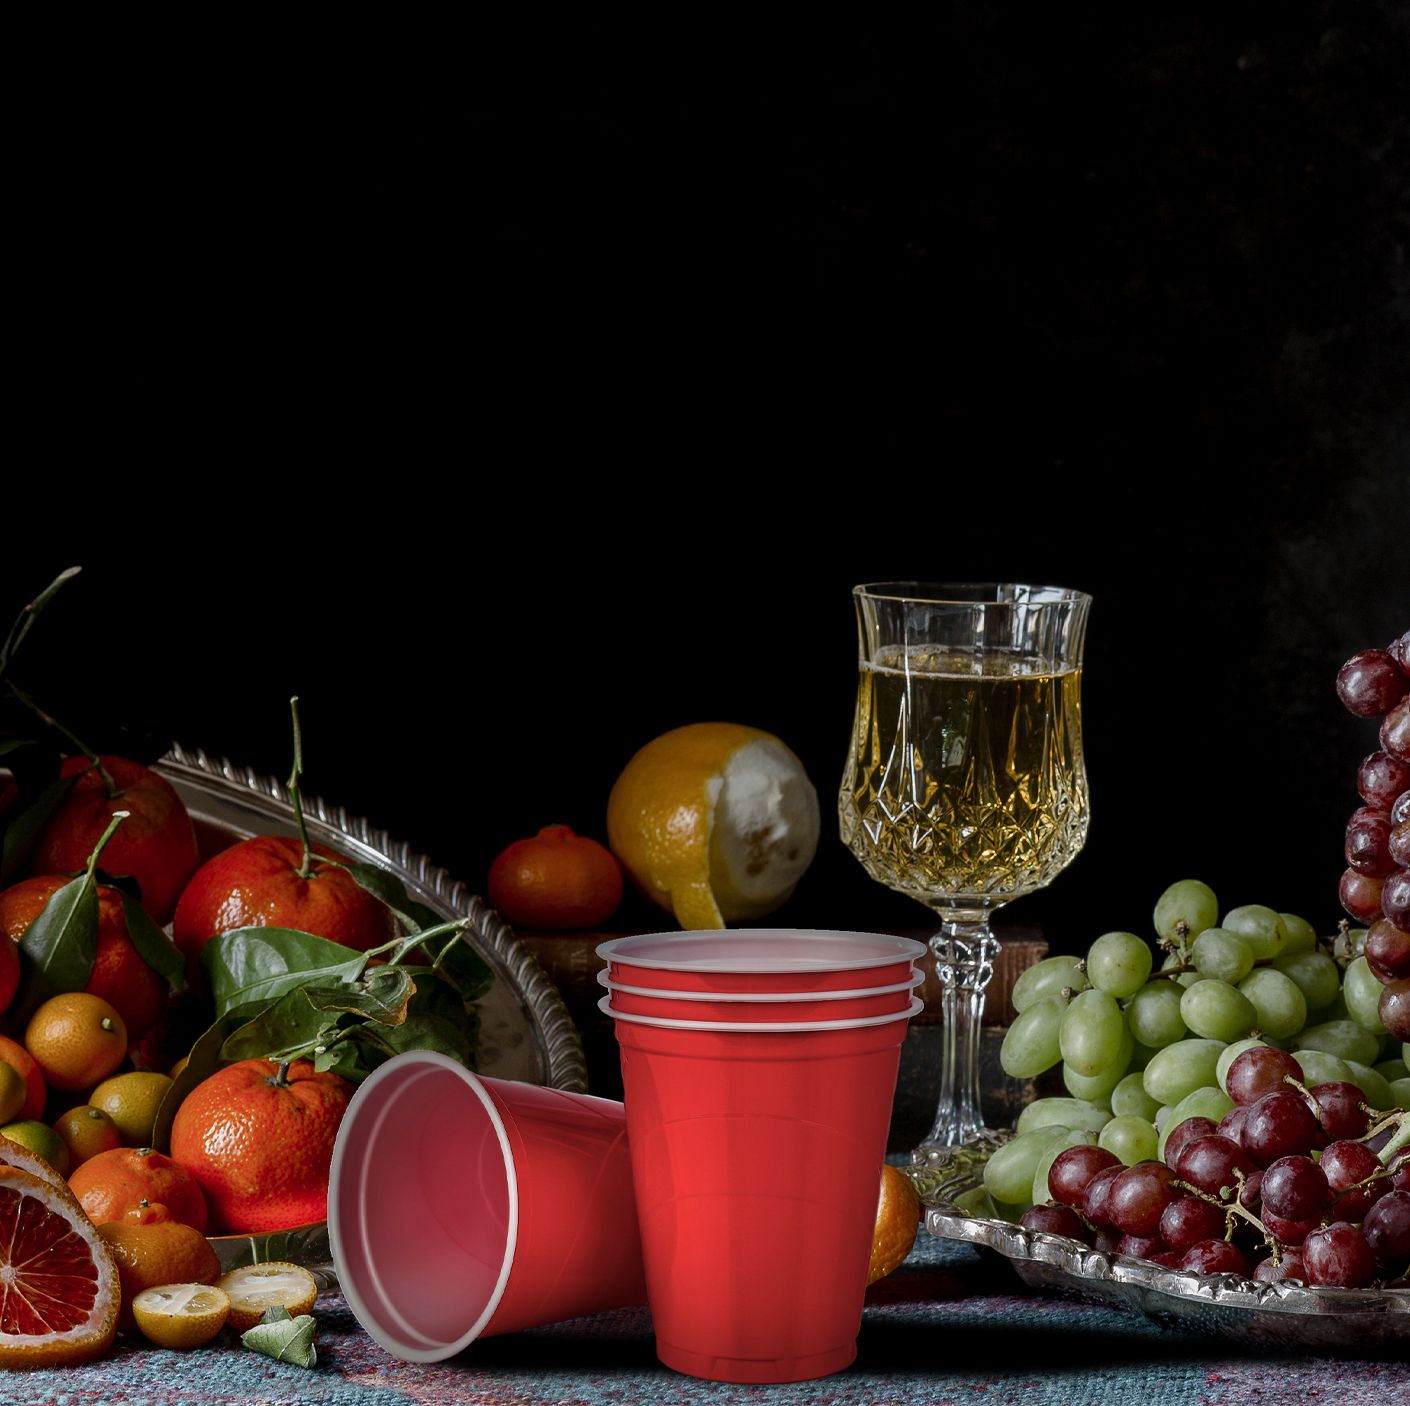 Design Debate: Can Red Solo Cups Ever Be Chic?